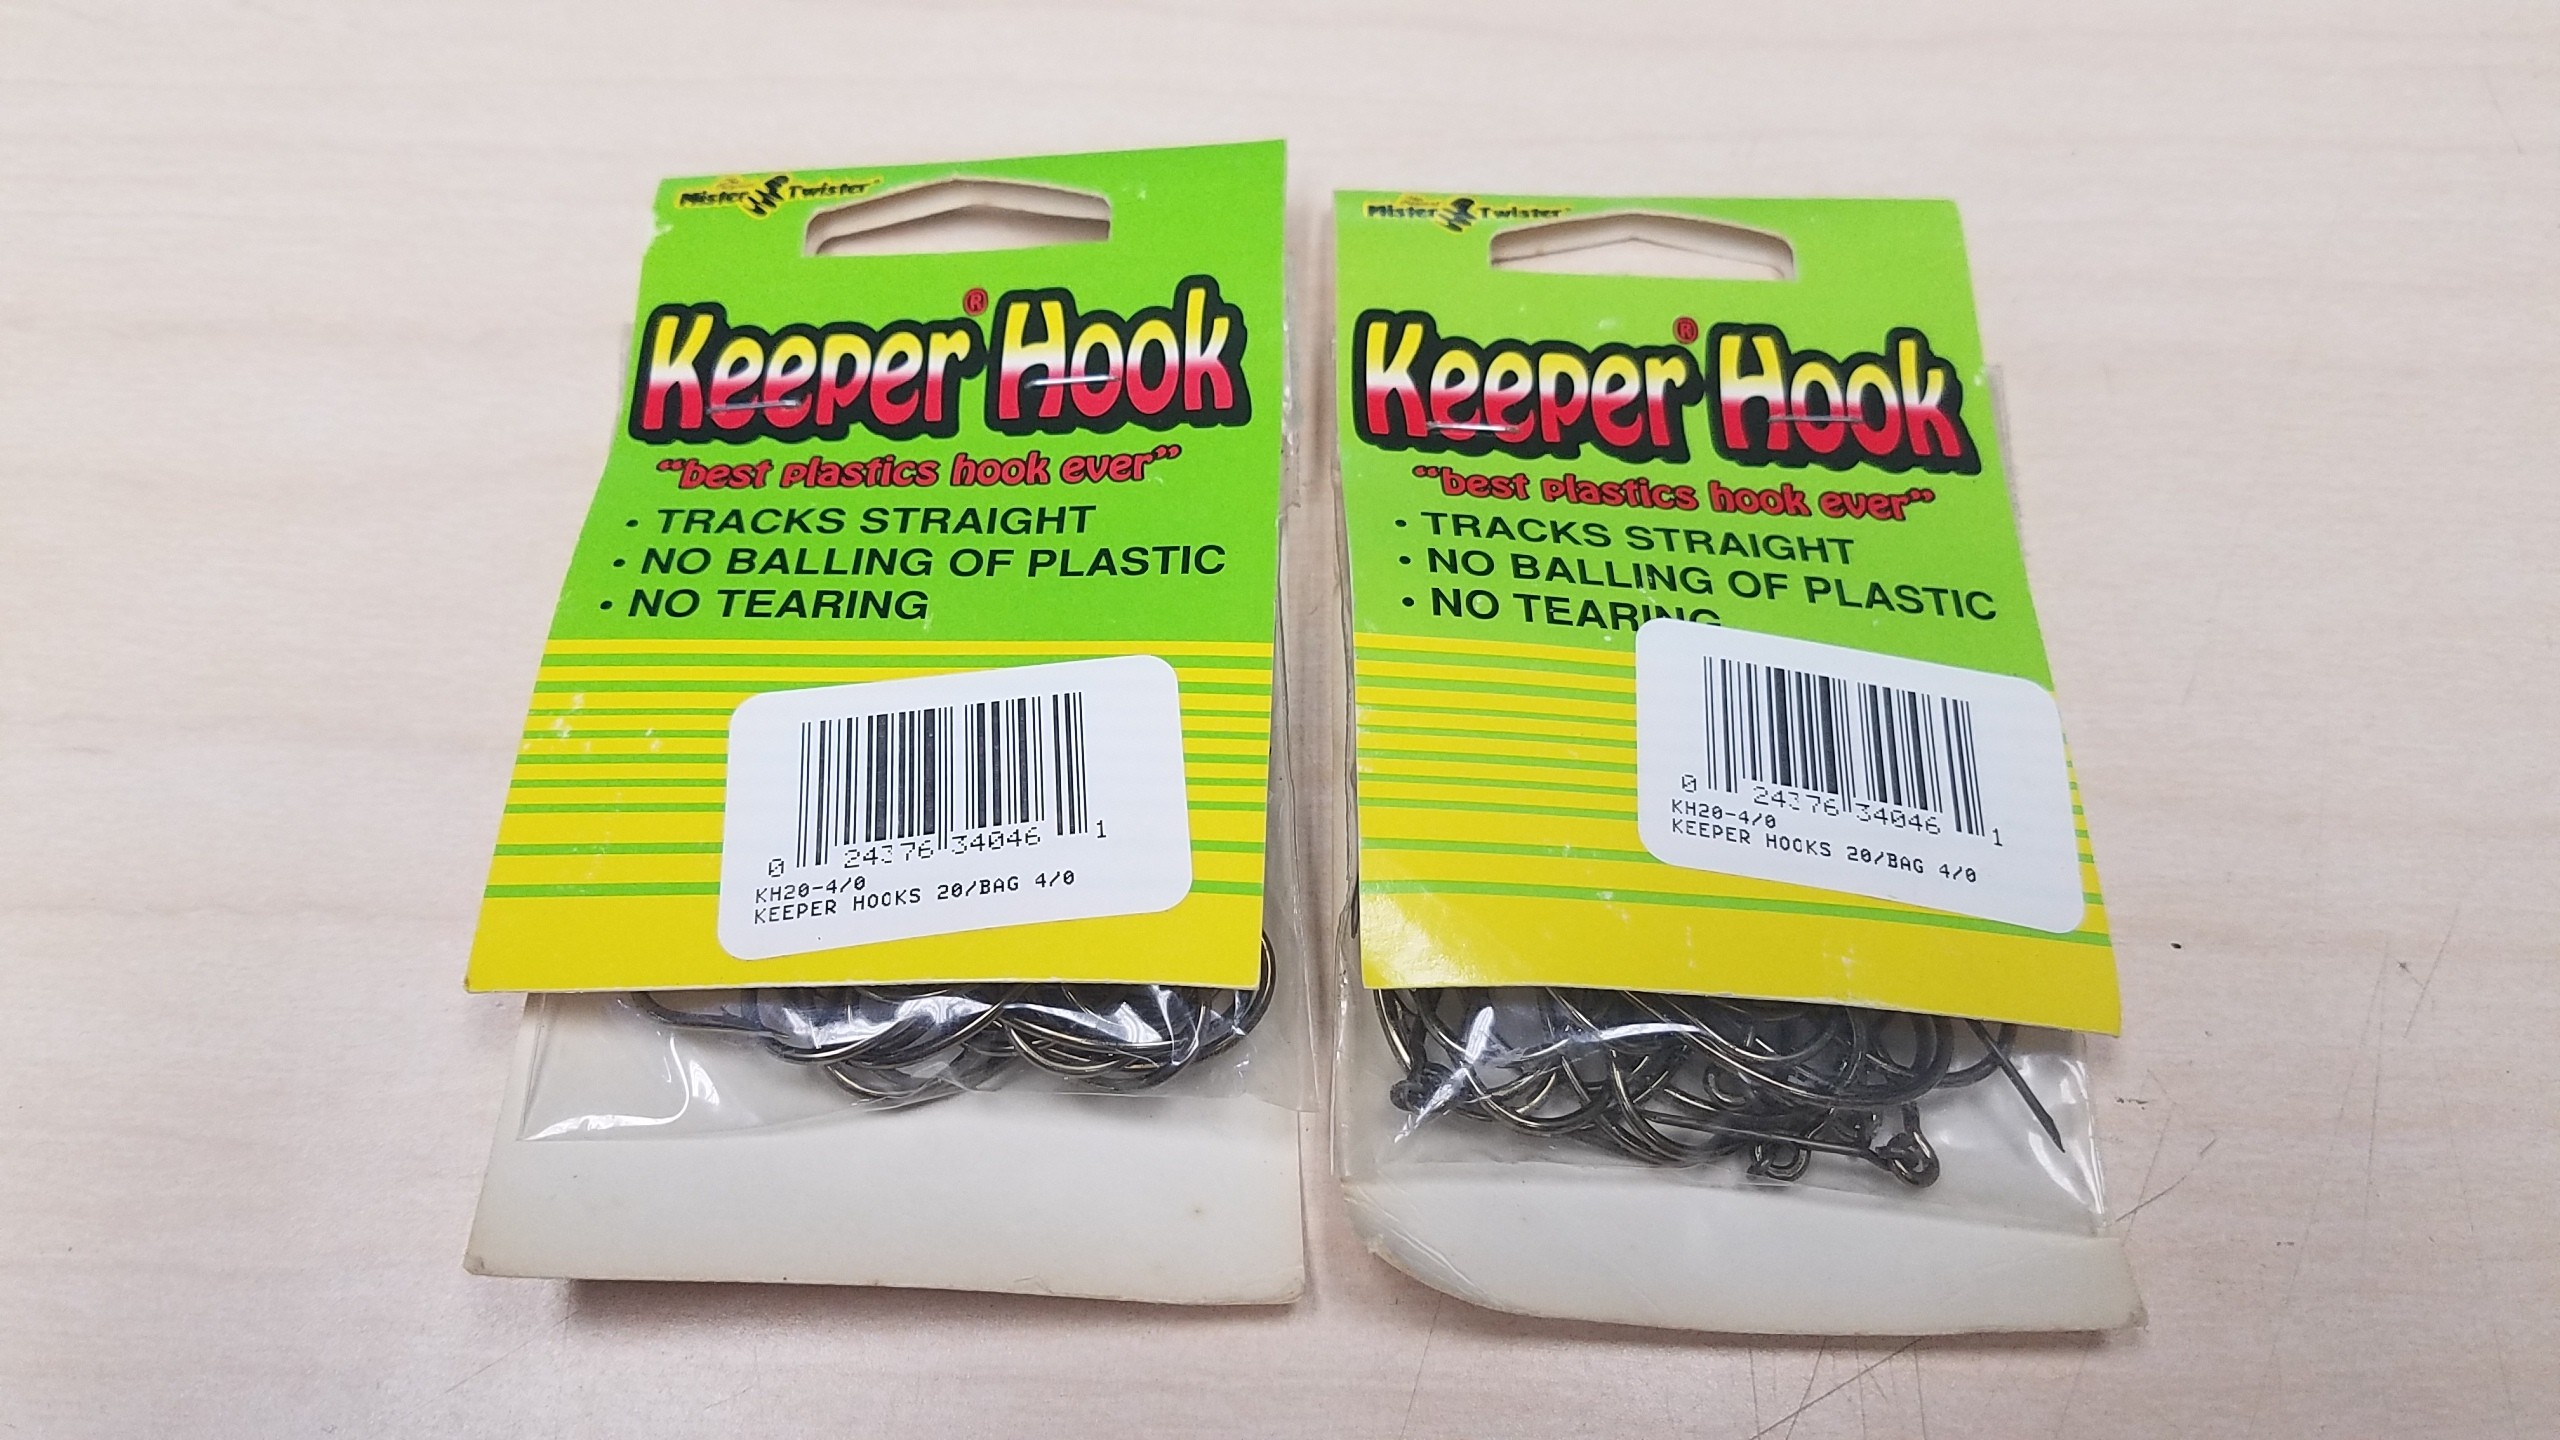 Mister Twister KH20-4/0 Keeper Hooks Size 4/0 2 20 Count Bags